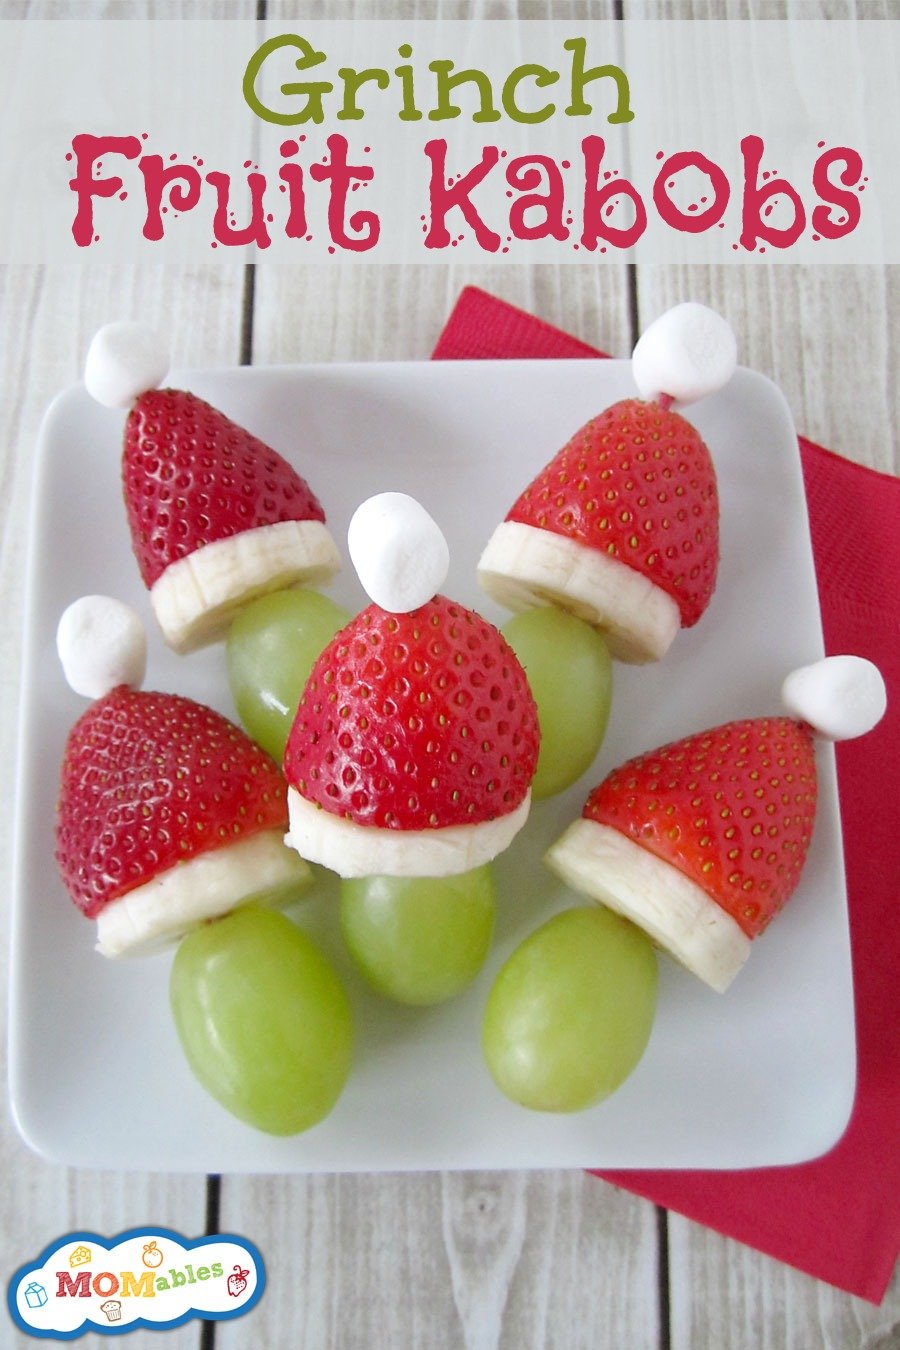 Over 20 Non-Candy, healthy fruit and vegetable Christmas snacks for kids school classroom Christmas parties - www.kidfriendlythingstodo.com